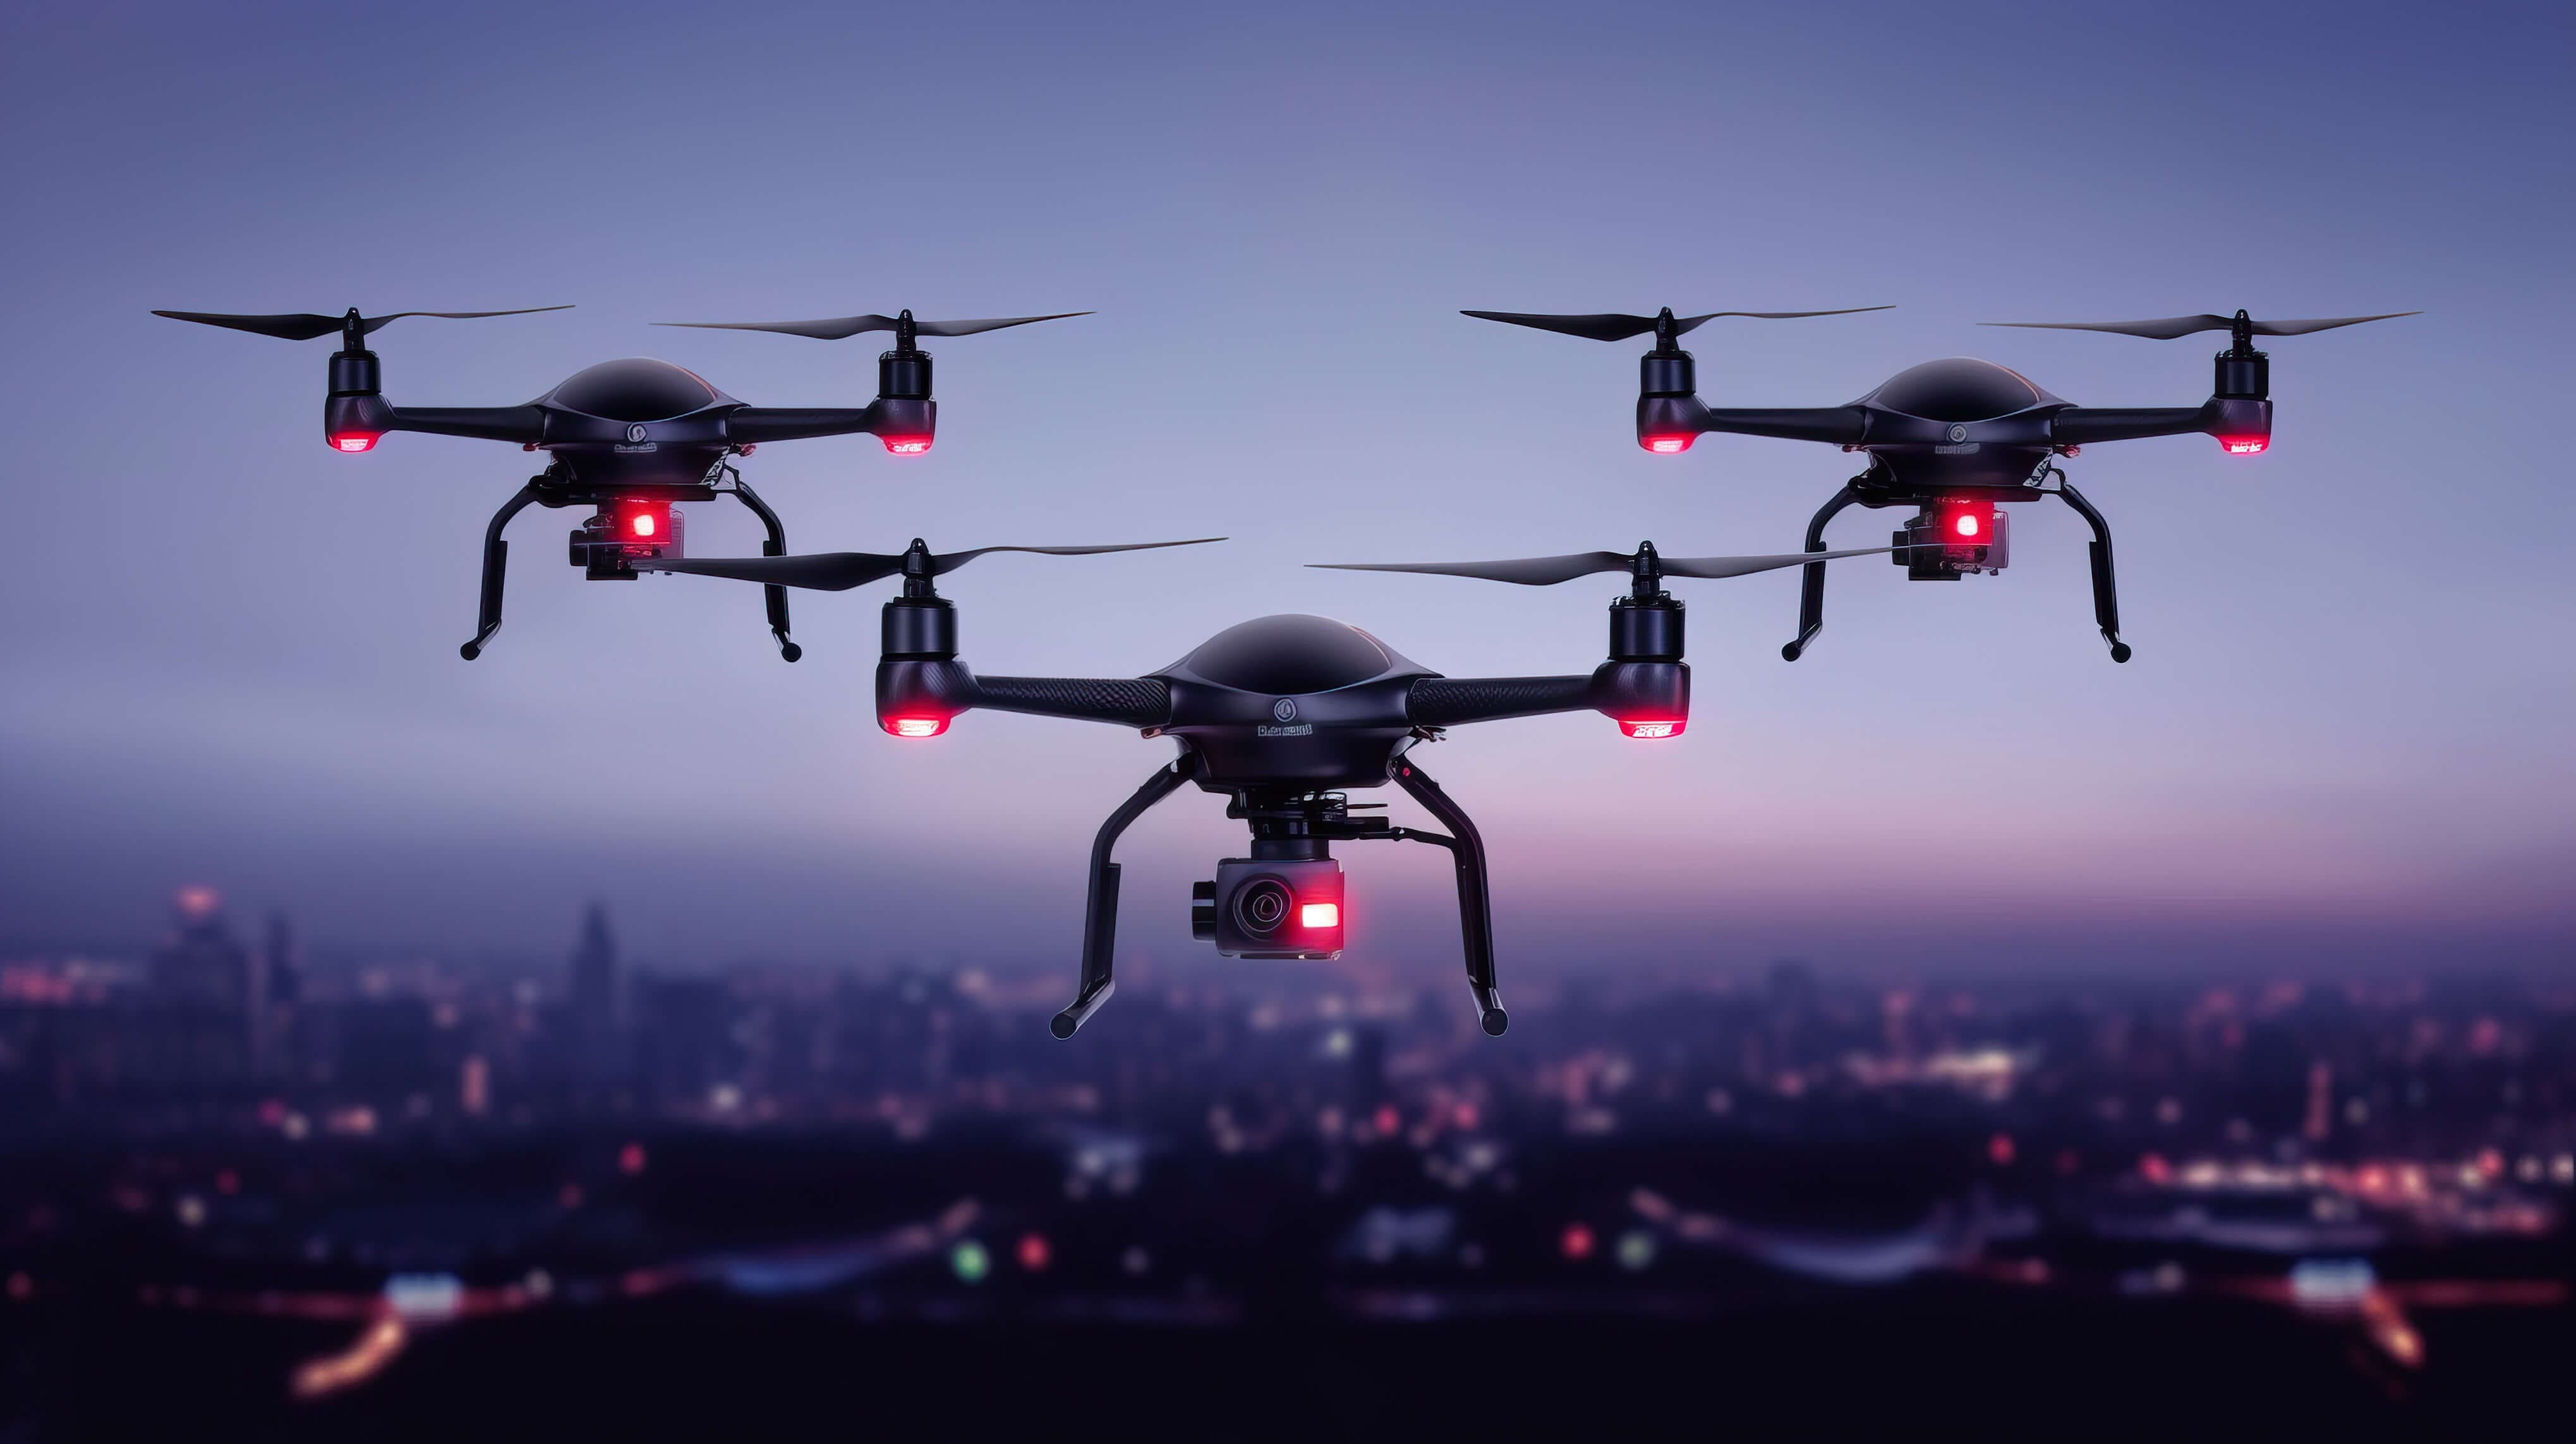 Three drones with video intelligence and cameras flying against a twilight city skyline.